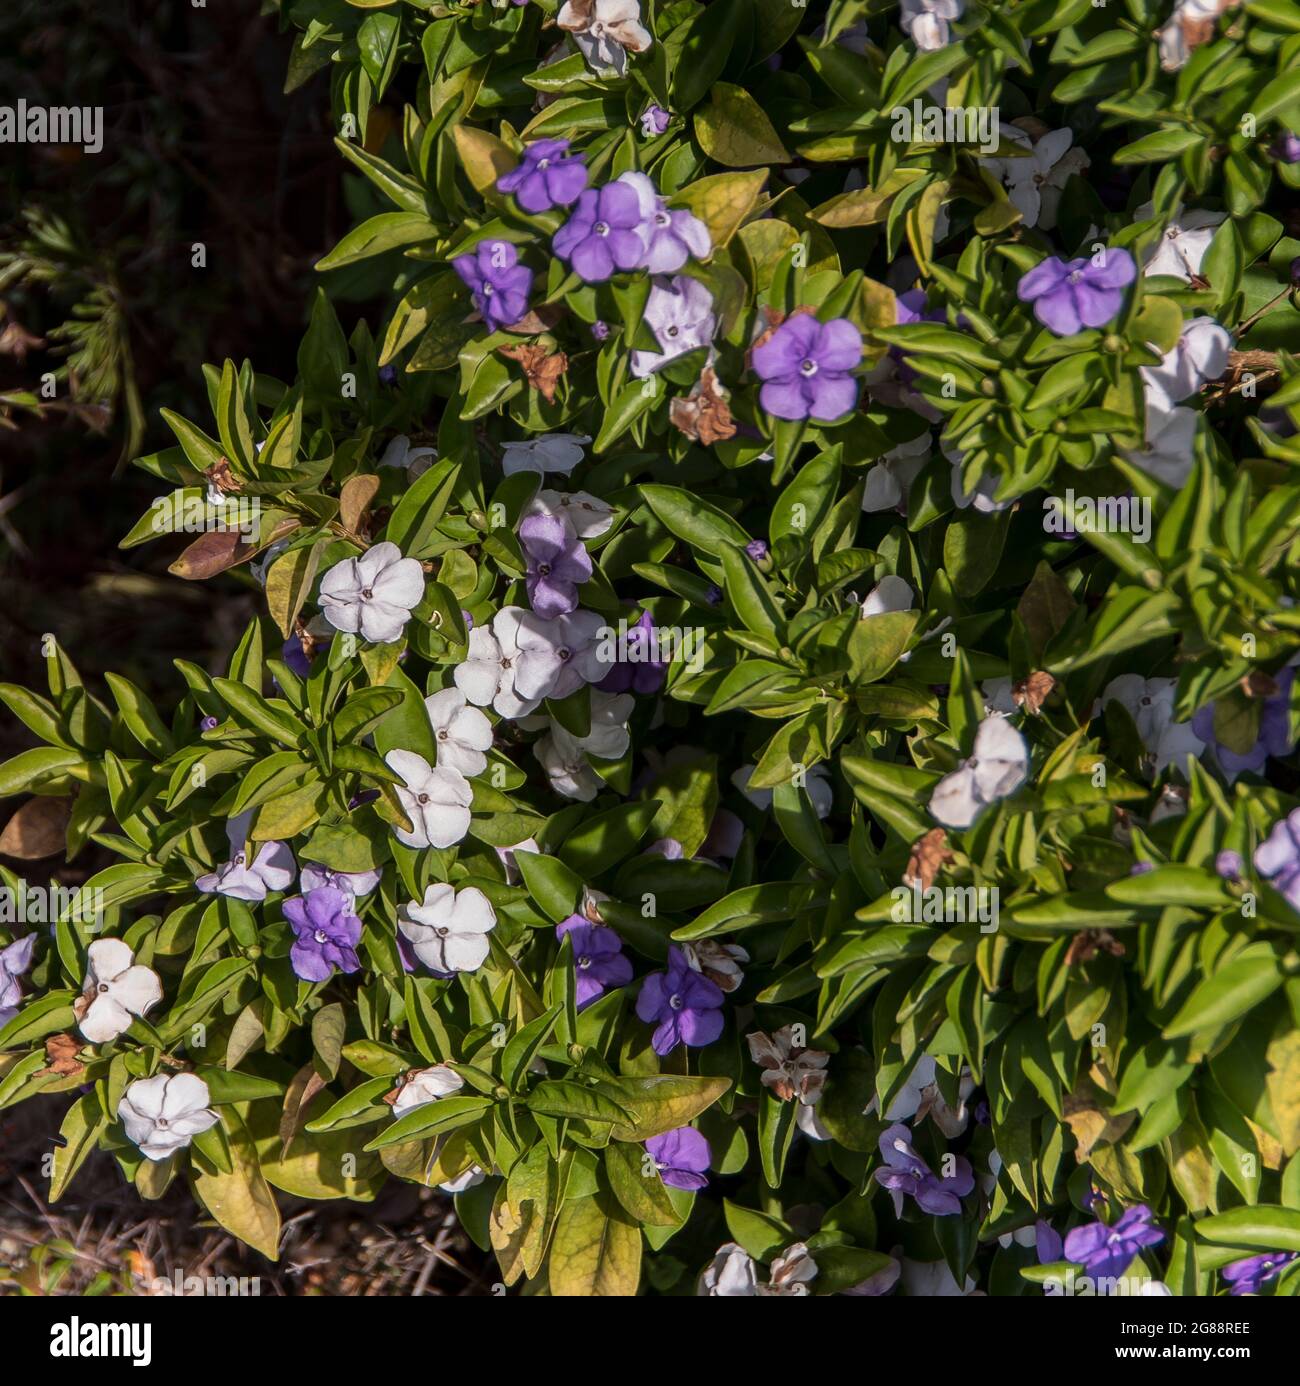 'Yesterday today and tomorrow' shrub (Brunfelsia pauciflora) flowers that change colour. Native of Brazil, growing in garden in Queensland, Australia. Stock Photo